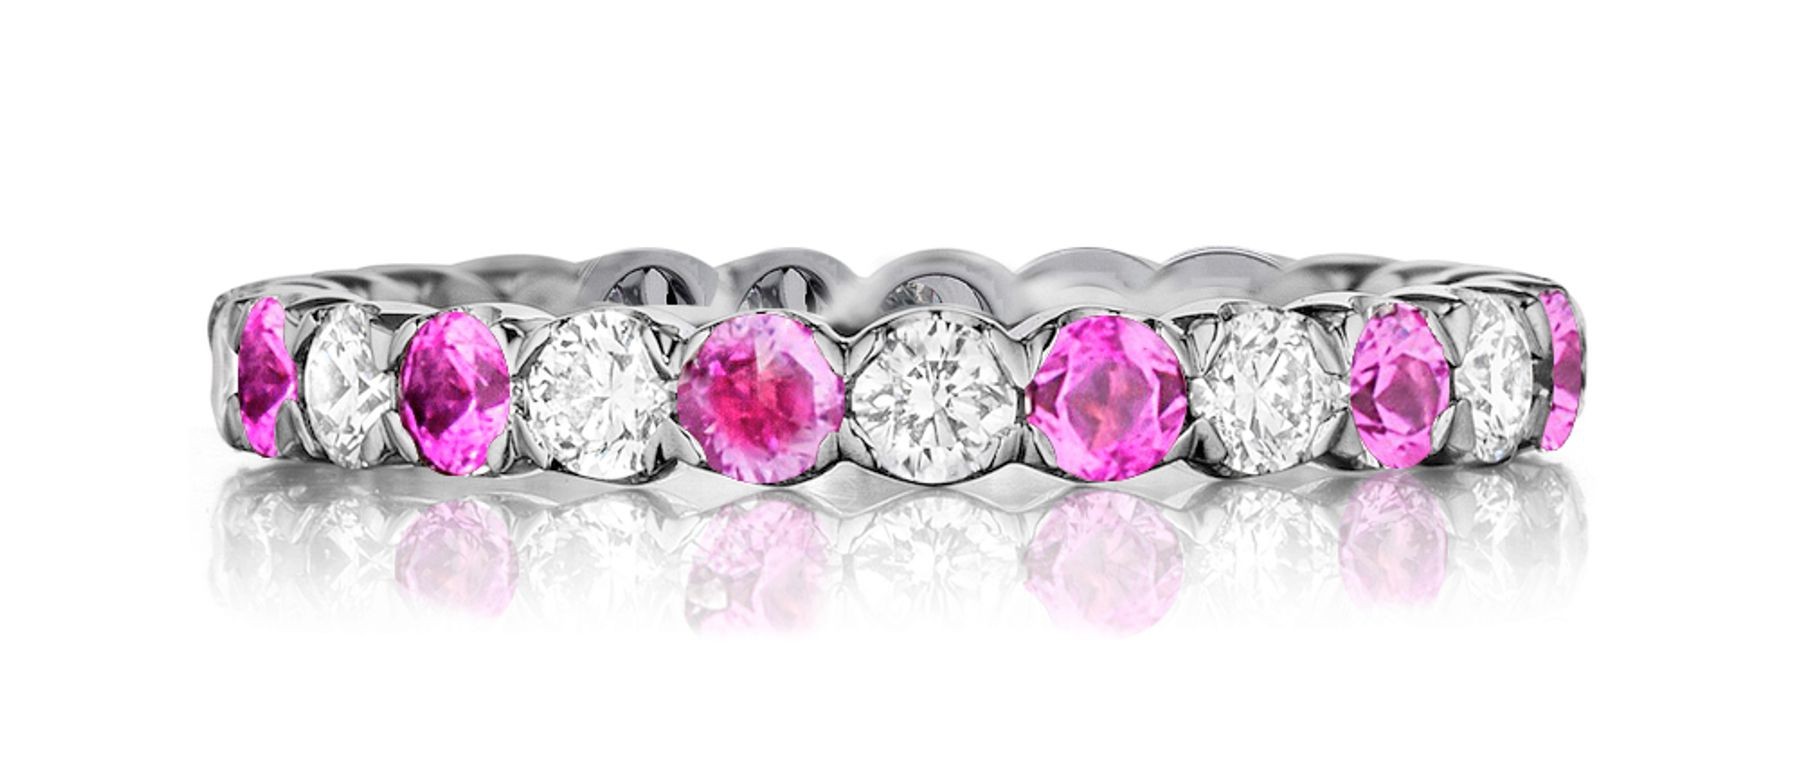 Made To Order Just For You Round Pink Sapphire & Diamond Prong Set Eternity Wedding Band Rings